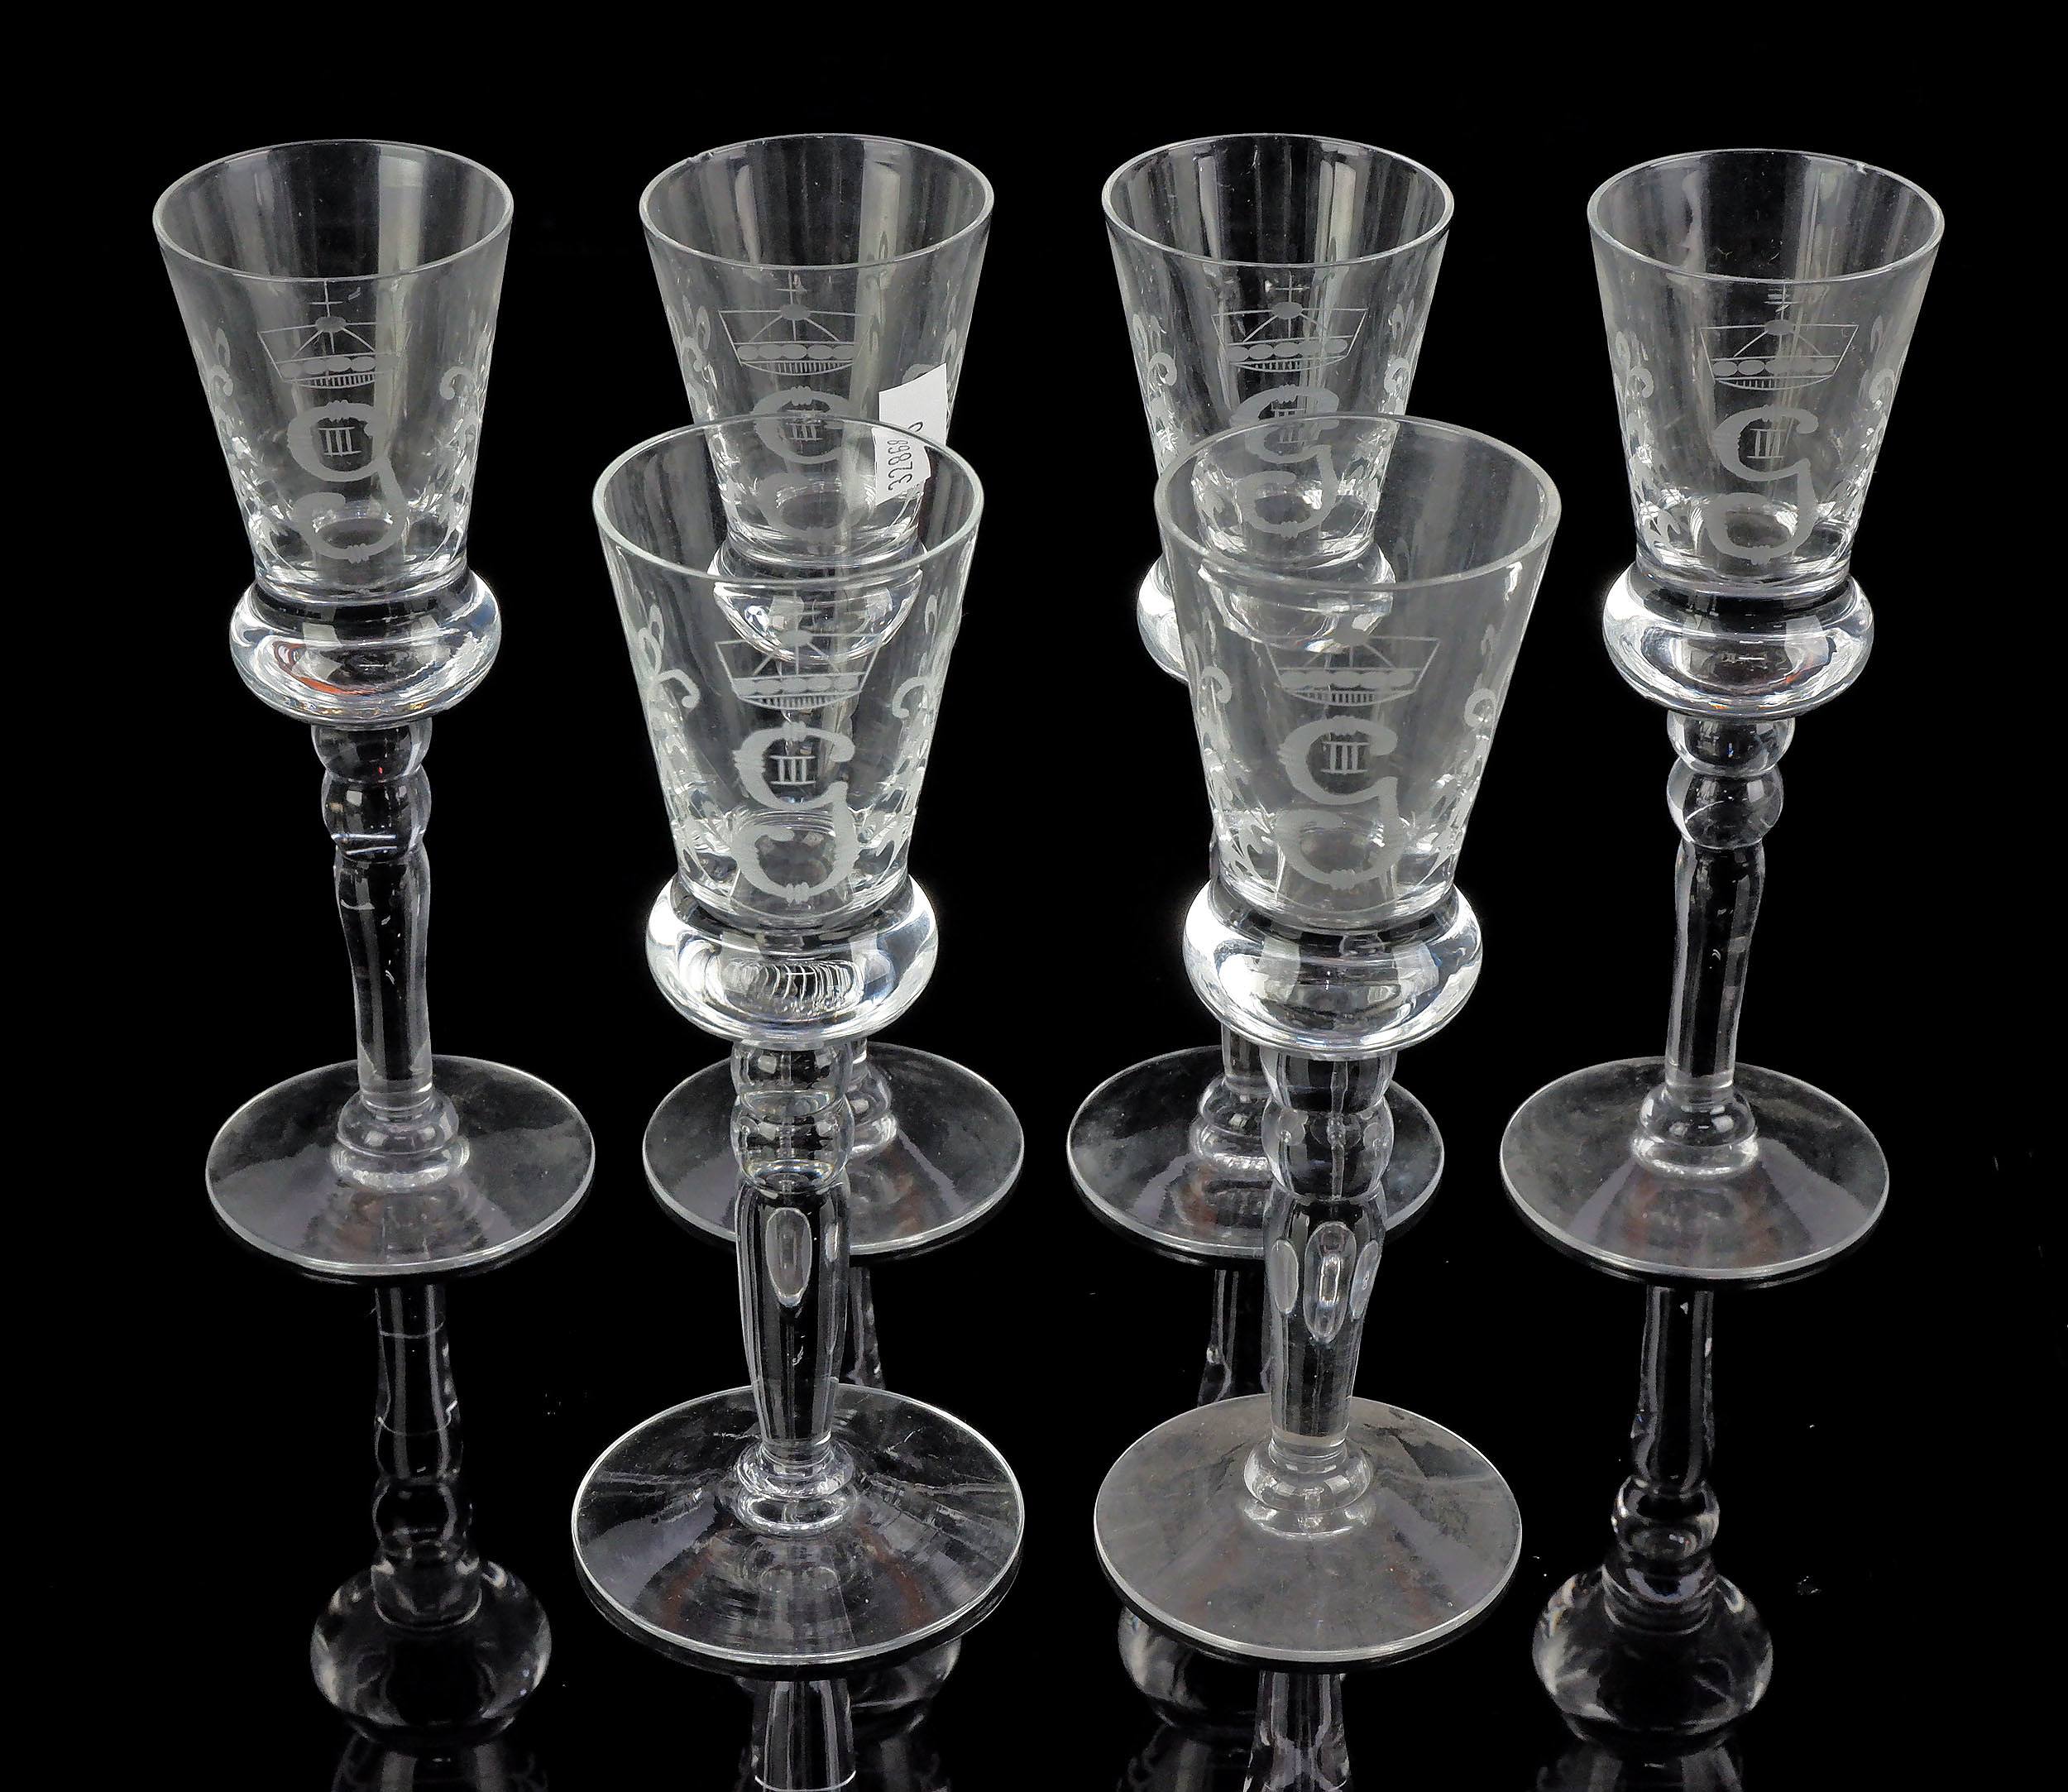 'Six Swedish Engraved Glass Schnapps Glasses with Engraved Crest of King Gustav'